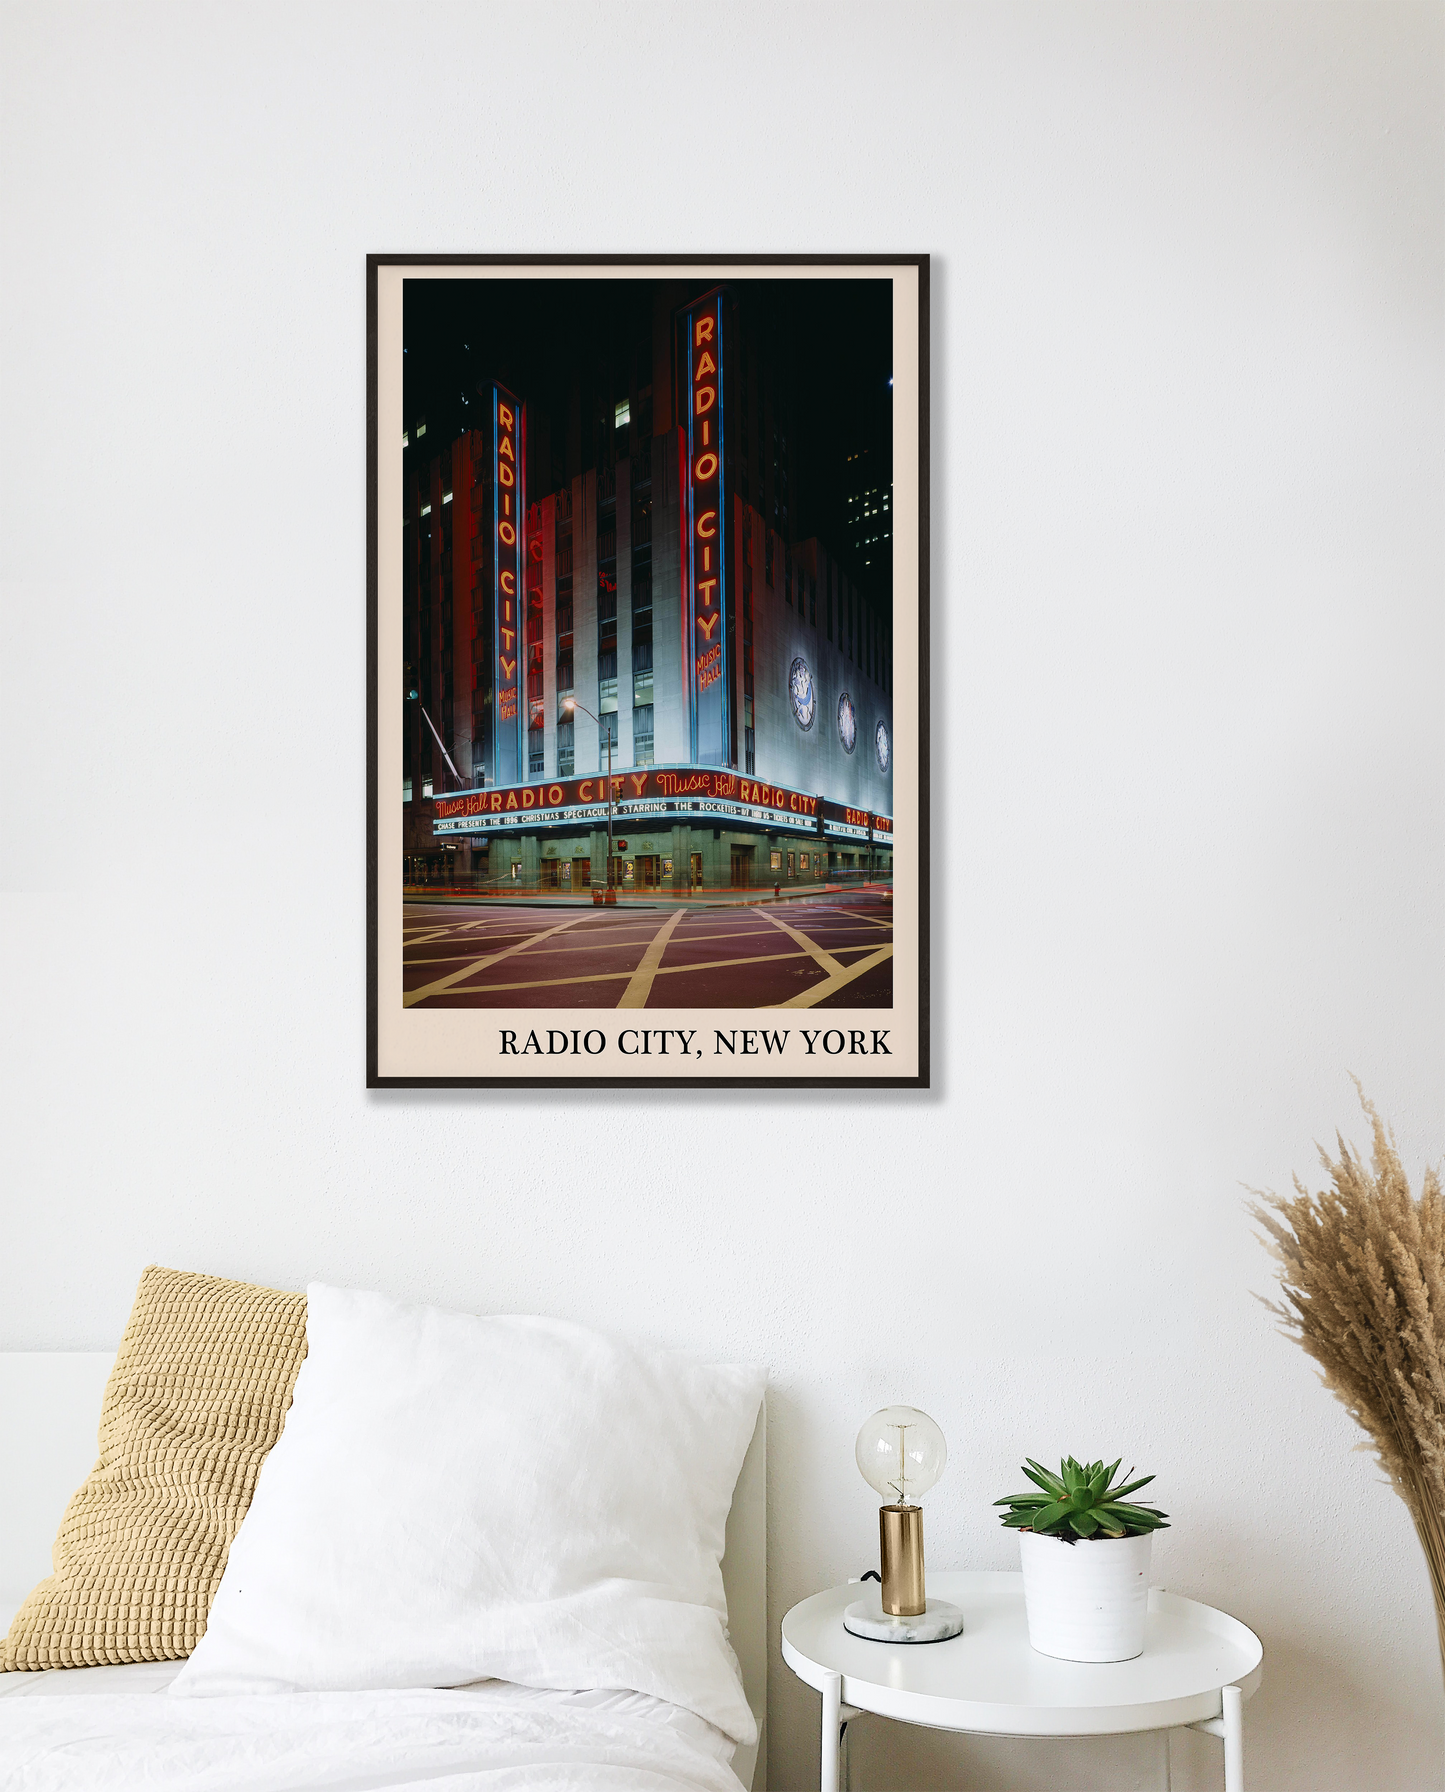 Iconic photo of Radio City in New York captured in a retro black framed music print, hanging on a white bedroom wall